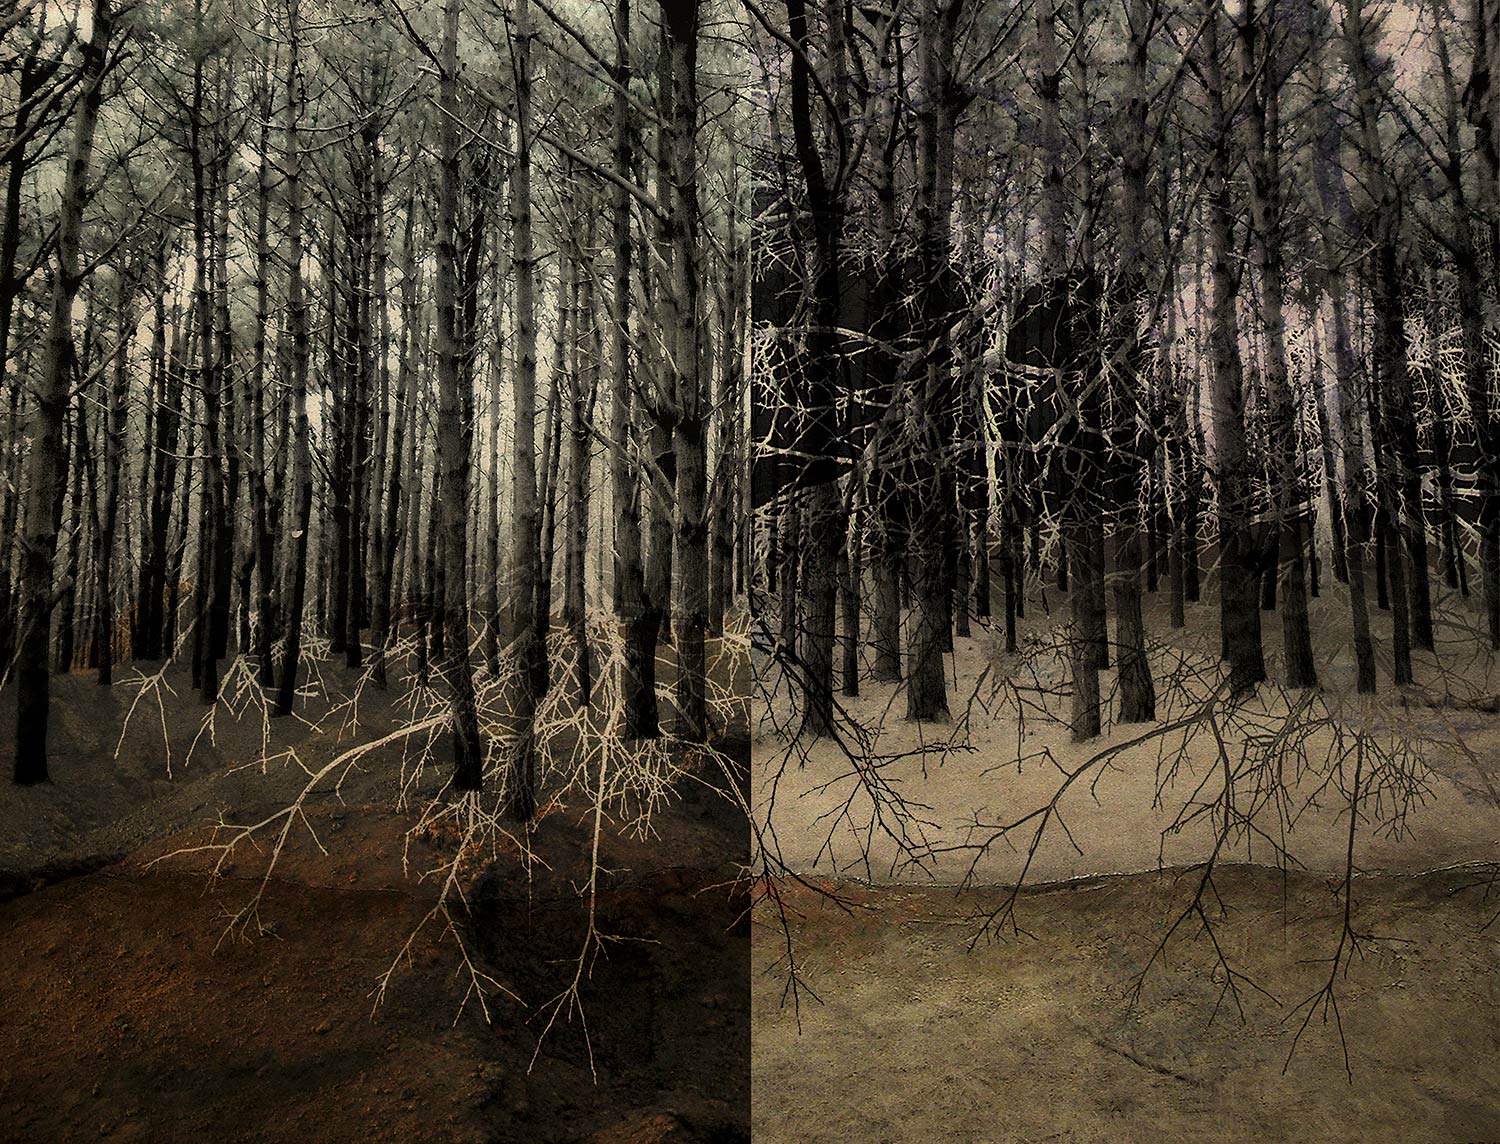 "Bosque dividido / Divided forest"